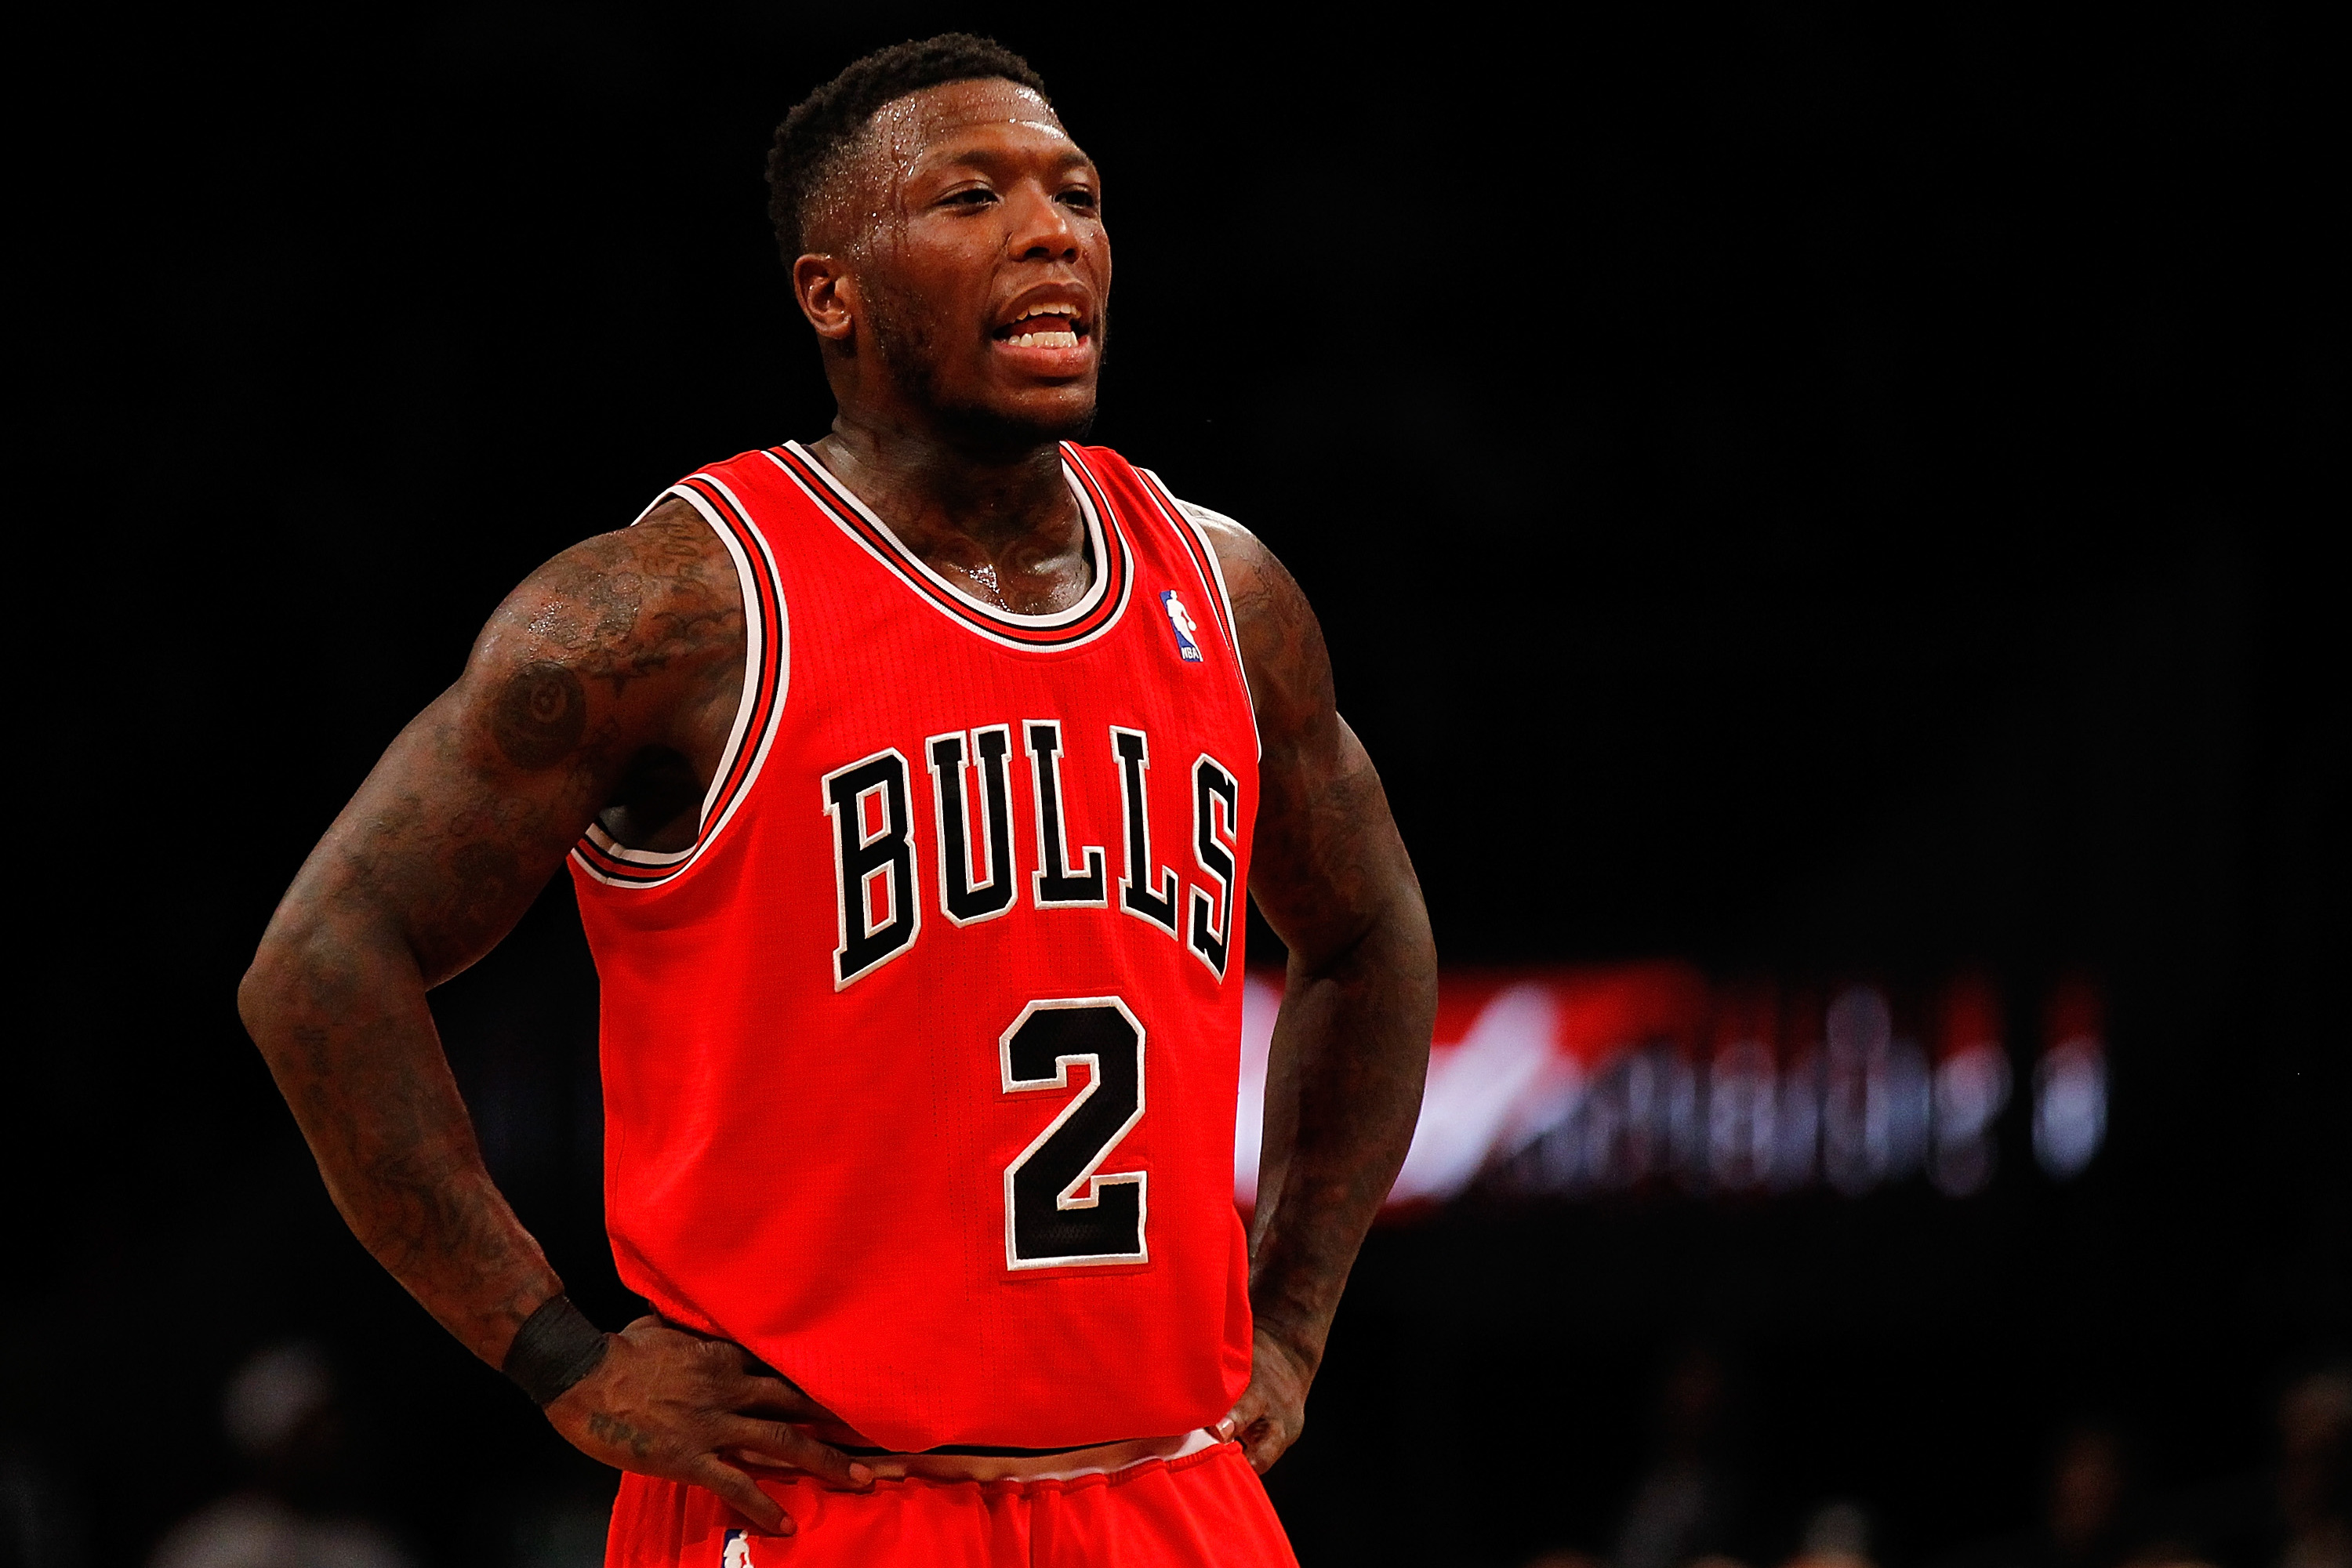 This is the reason why the 5'9 Nate Robinson is one of my favorite players  to watch.